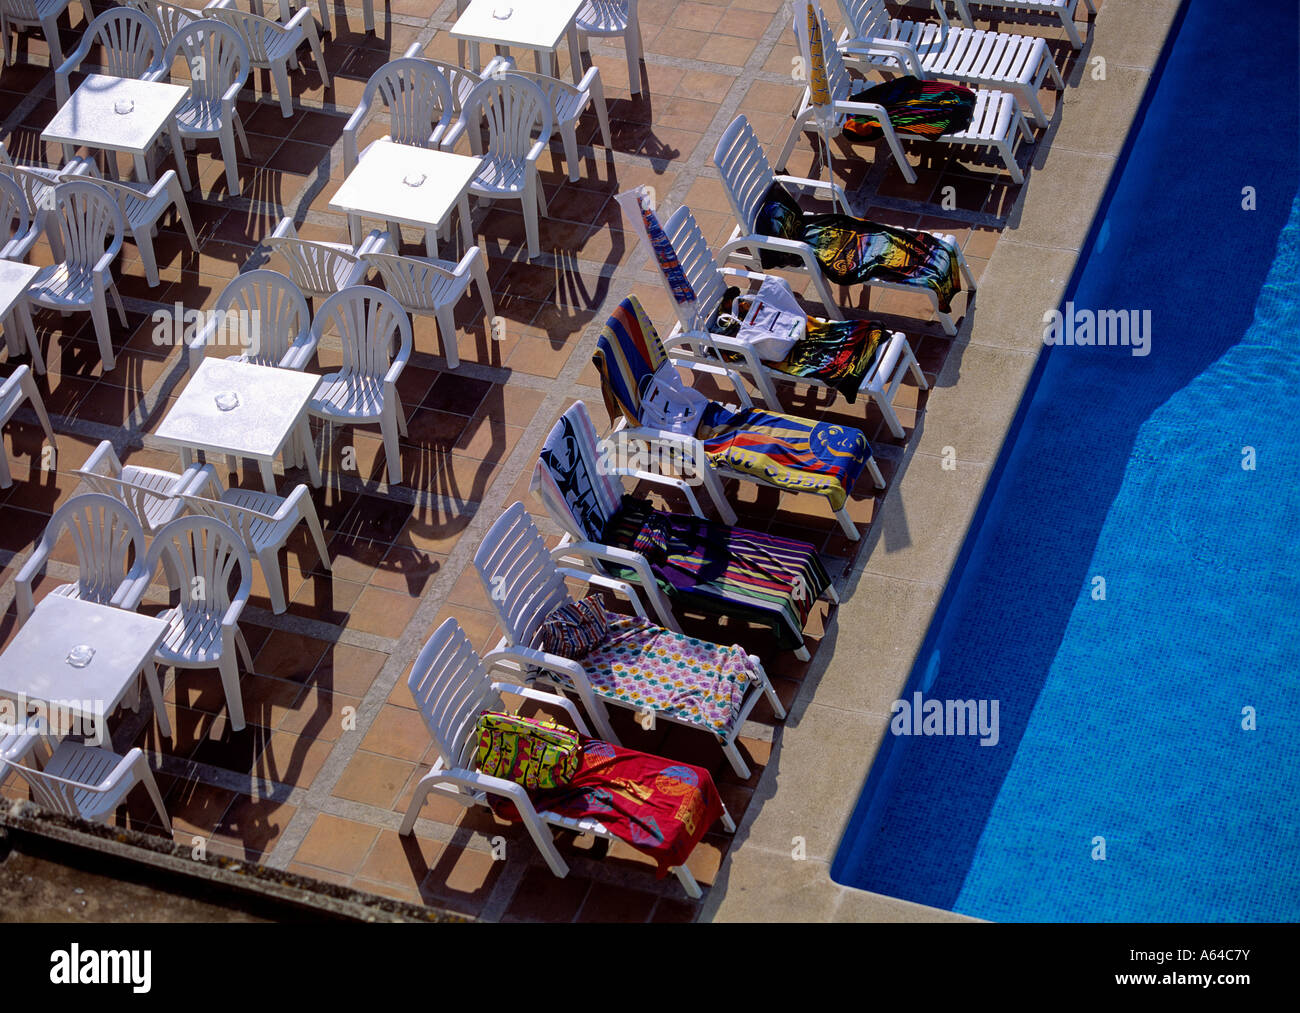 loungers at hotel swimmingpool reserved in advance Stock Photo